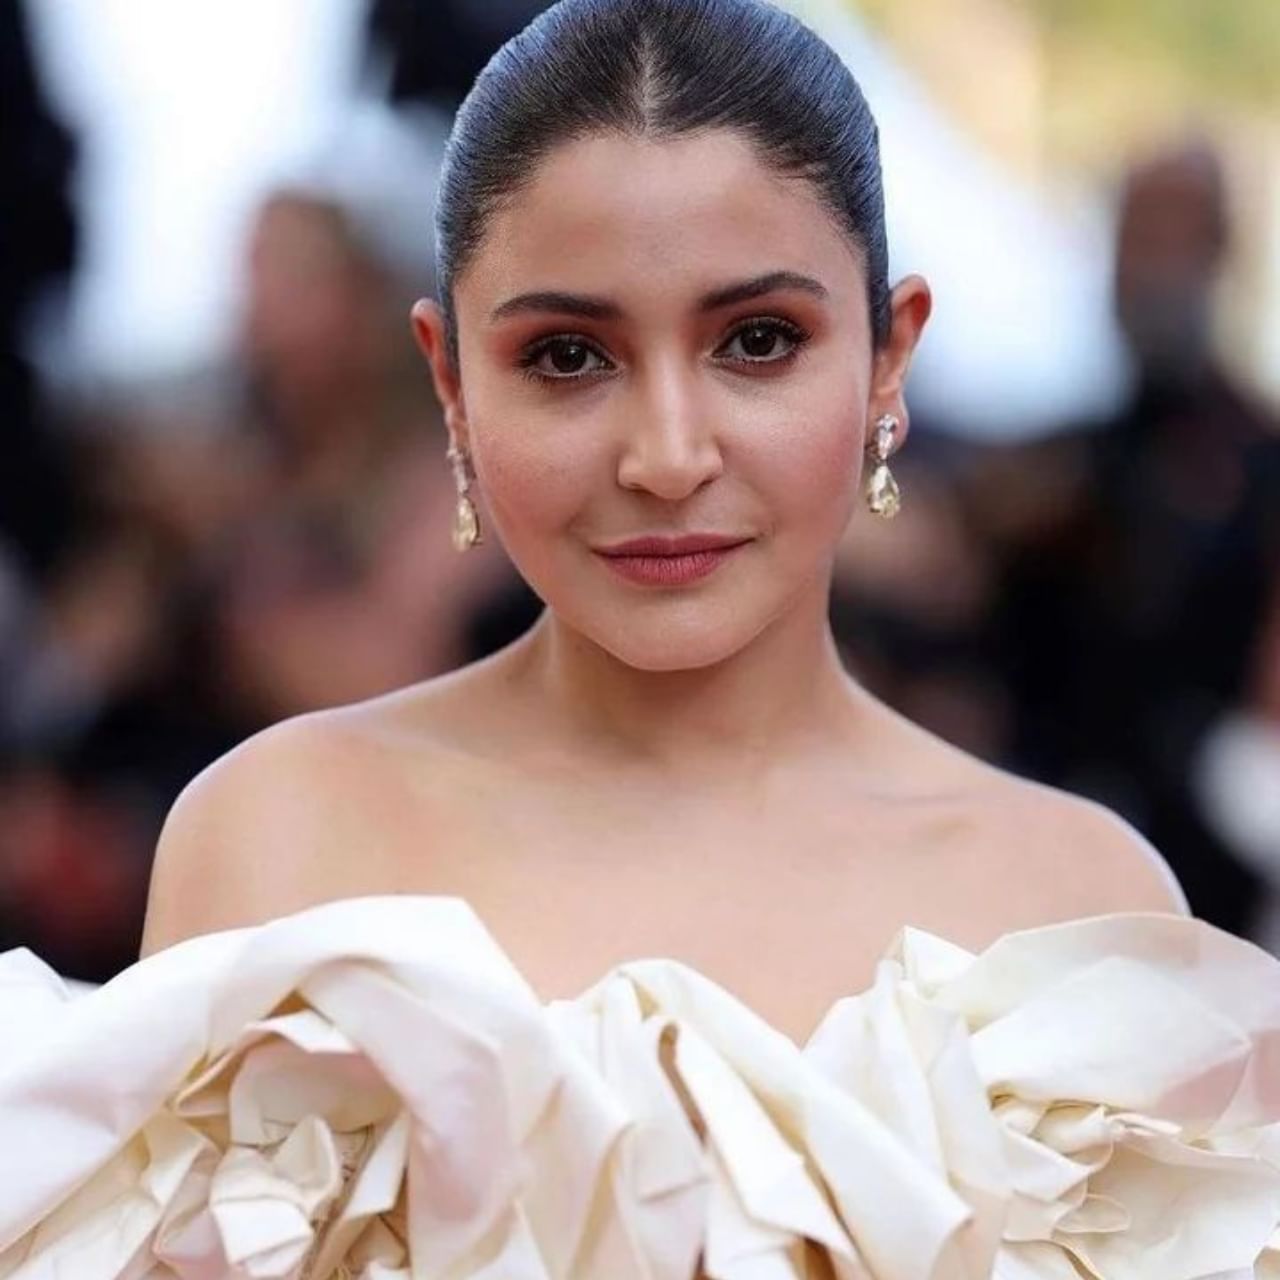 Anushka Sharma Cannes Look Viral: Cannes Film Festival is now at its last stop.  From the very beginning, the blaze of Bollywood stars was seen in Cannes.  From Mrinal Thakur to Sapna Chowdhary, they won the hearts of fans with their stunning appearances.  Now, in its closing ceremony, the heartbeat of young hearts, Anushka Sharma is also spreading her charm.  (Photo credit- @anushkasharma)